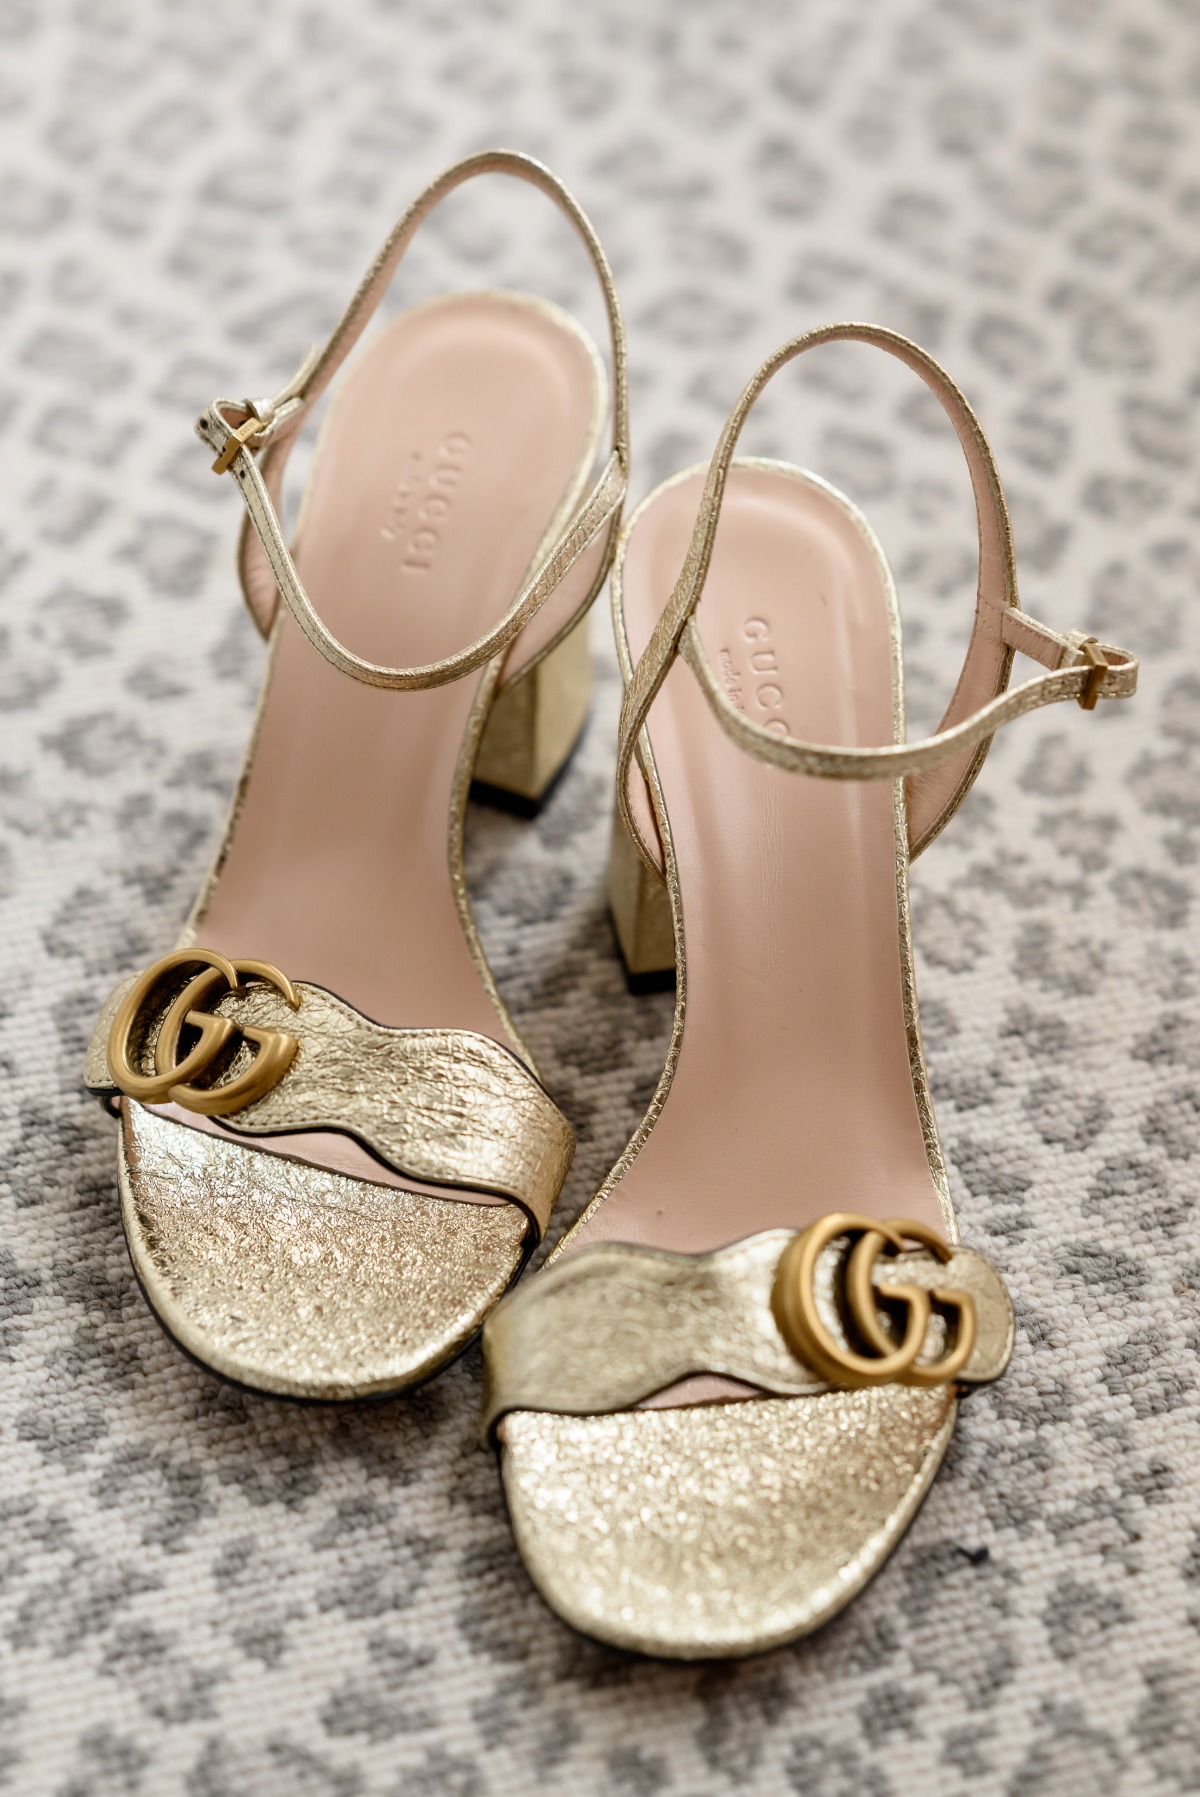 gold Gucci wedding shoes